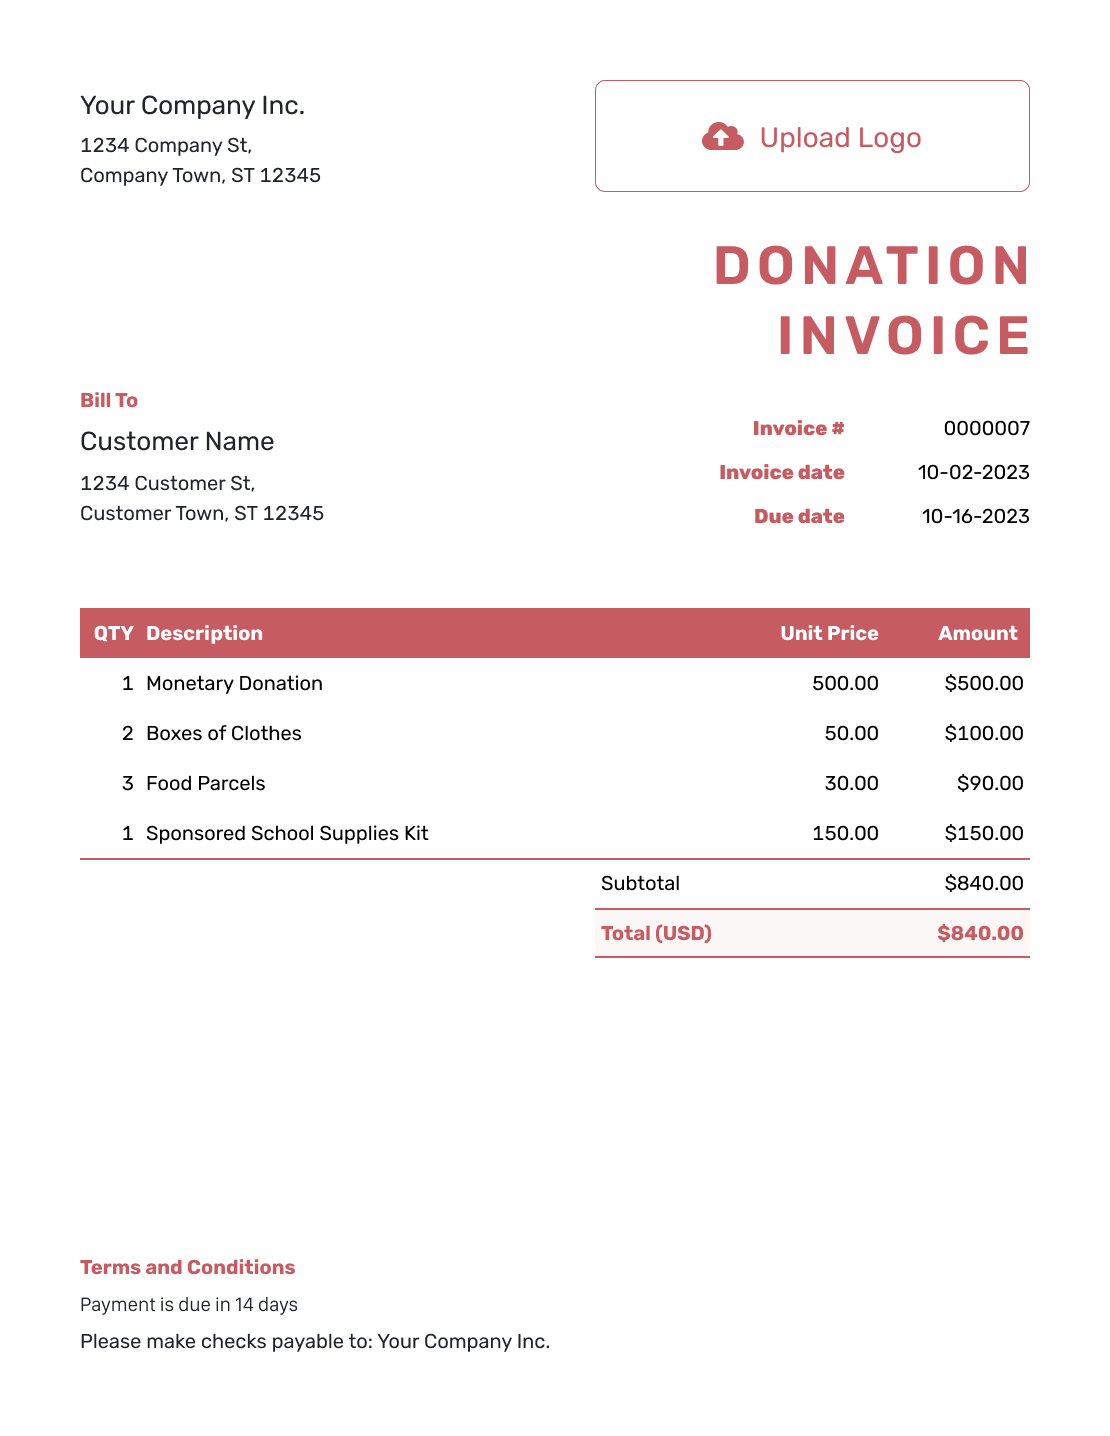 Itemized Donation Invoice Template